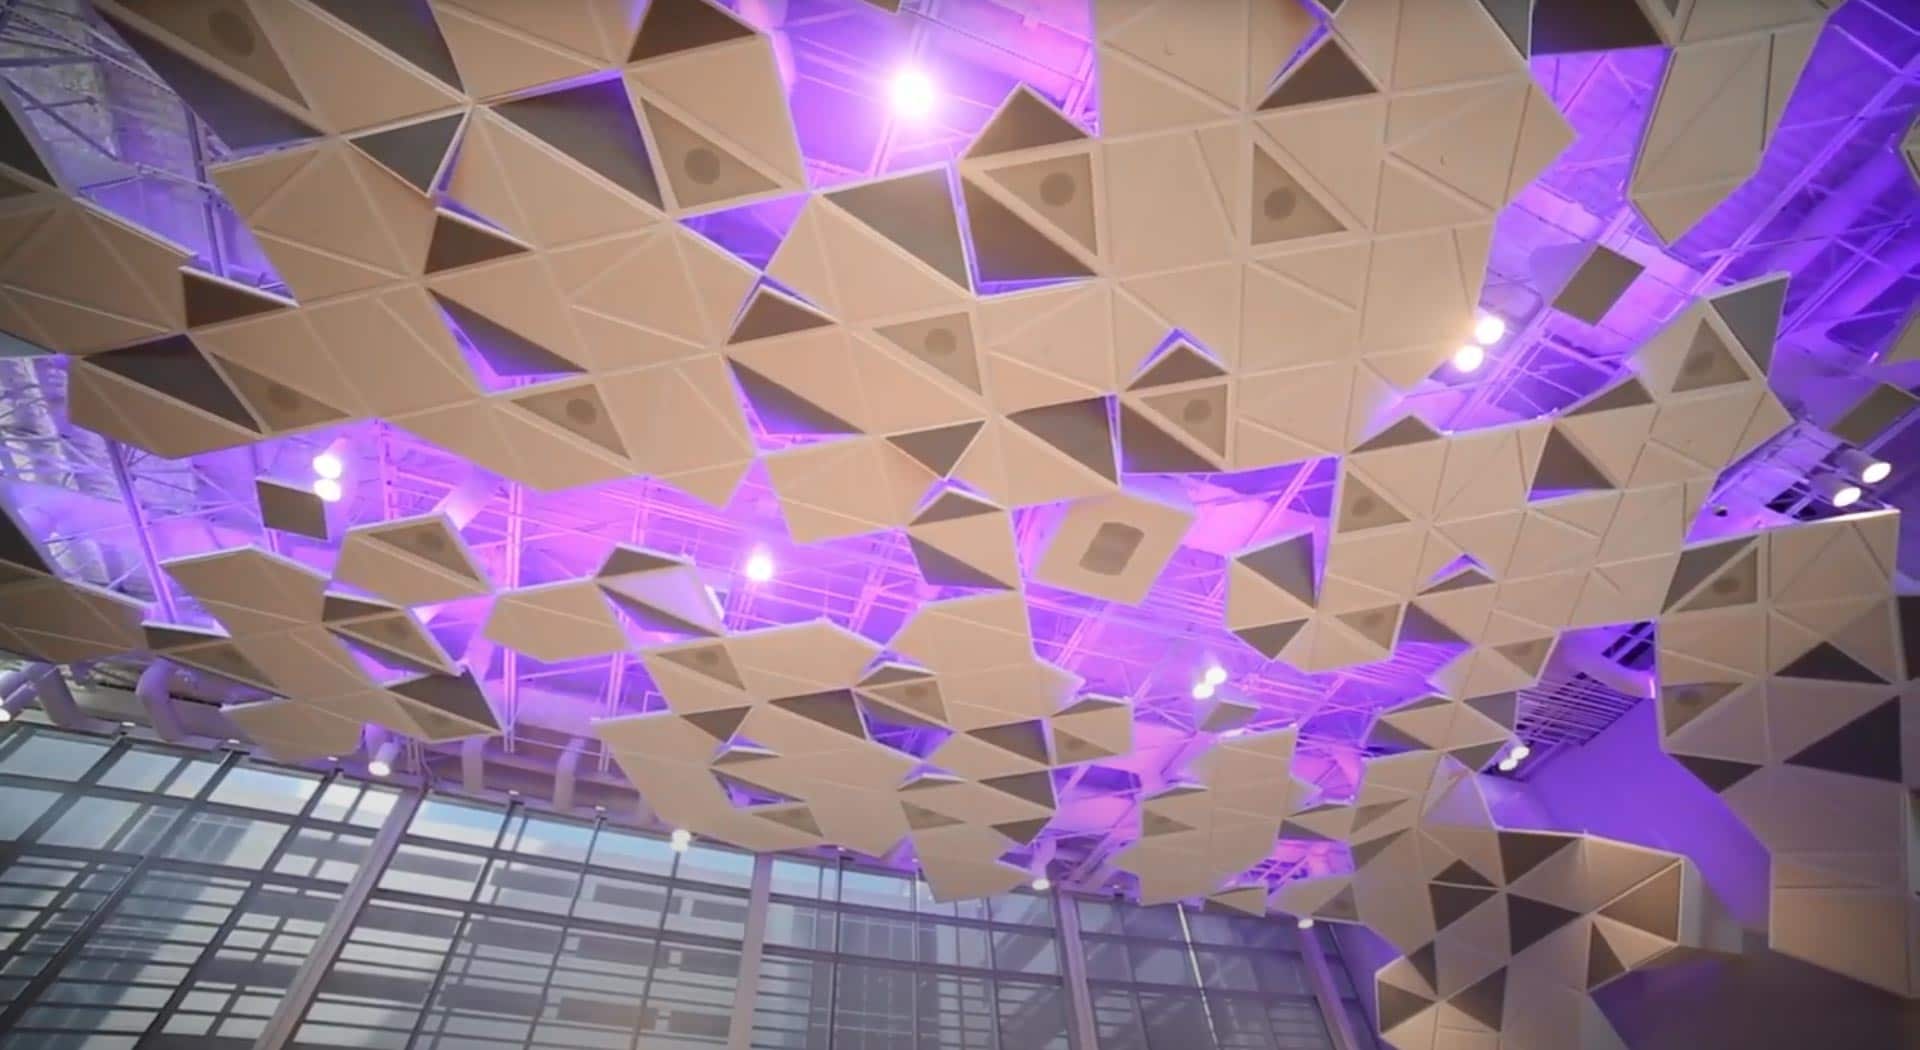 Purple fiber optic lighting at a conference.